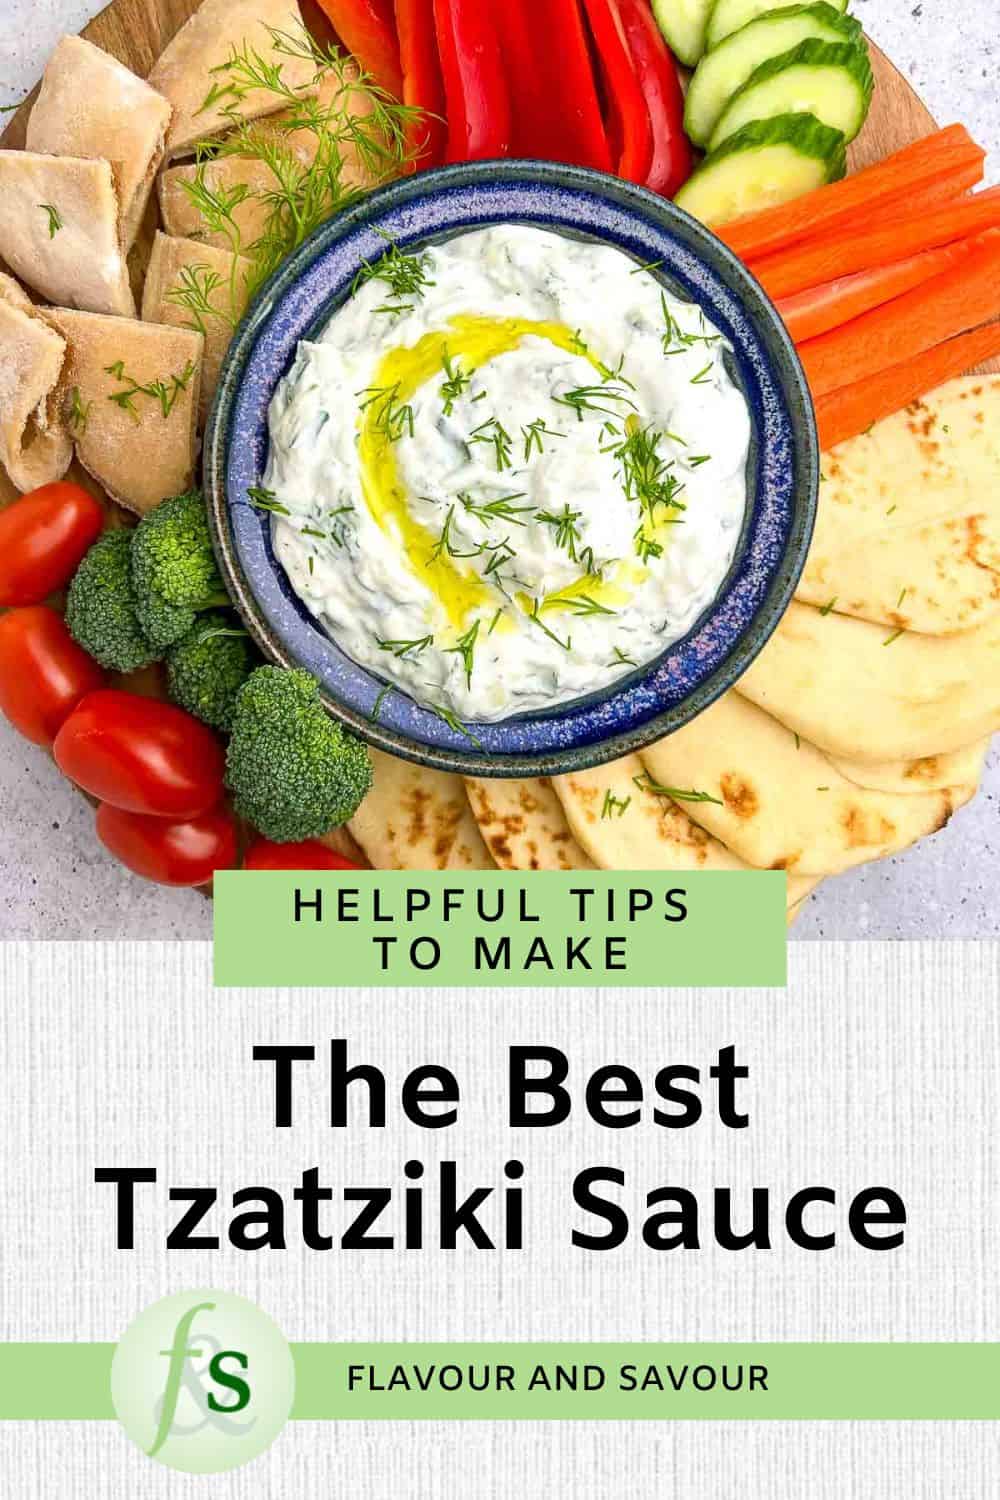 Image with text overlay for how to make tzatziki sauce.